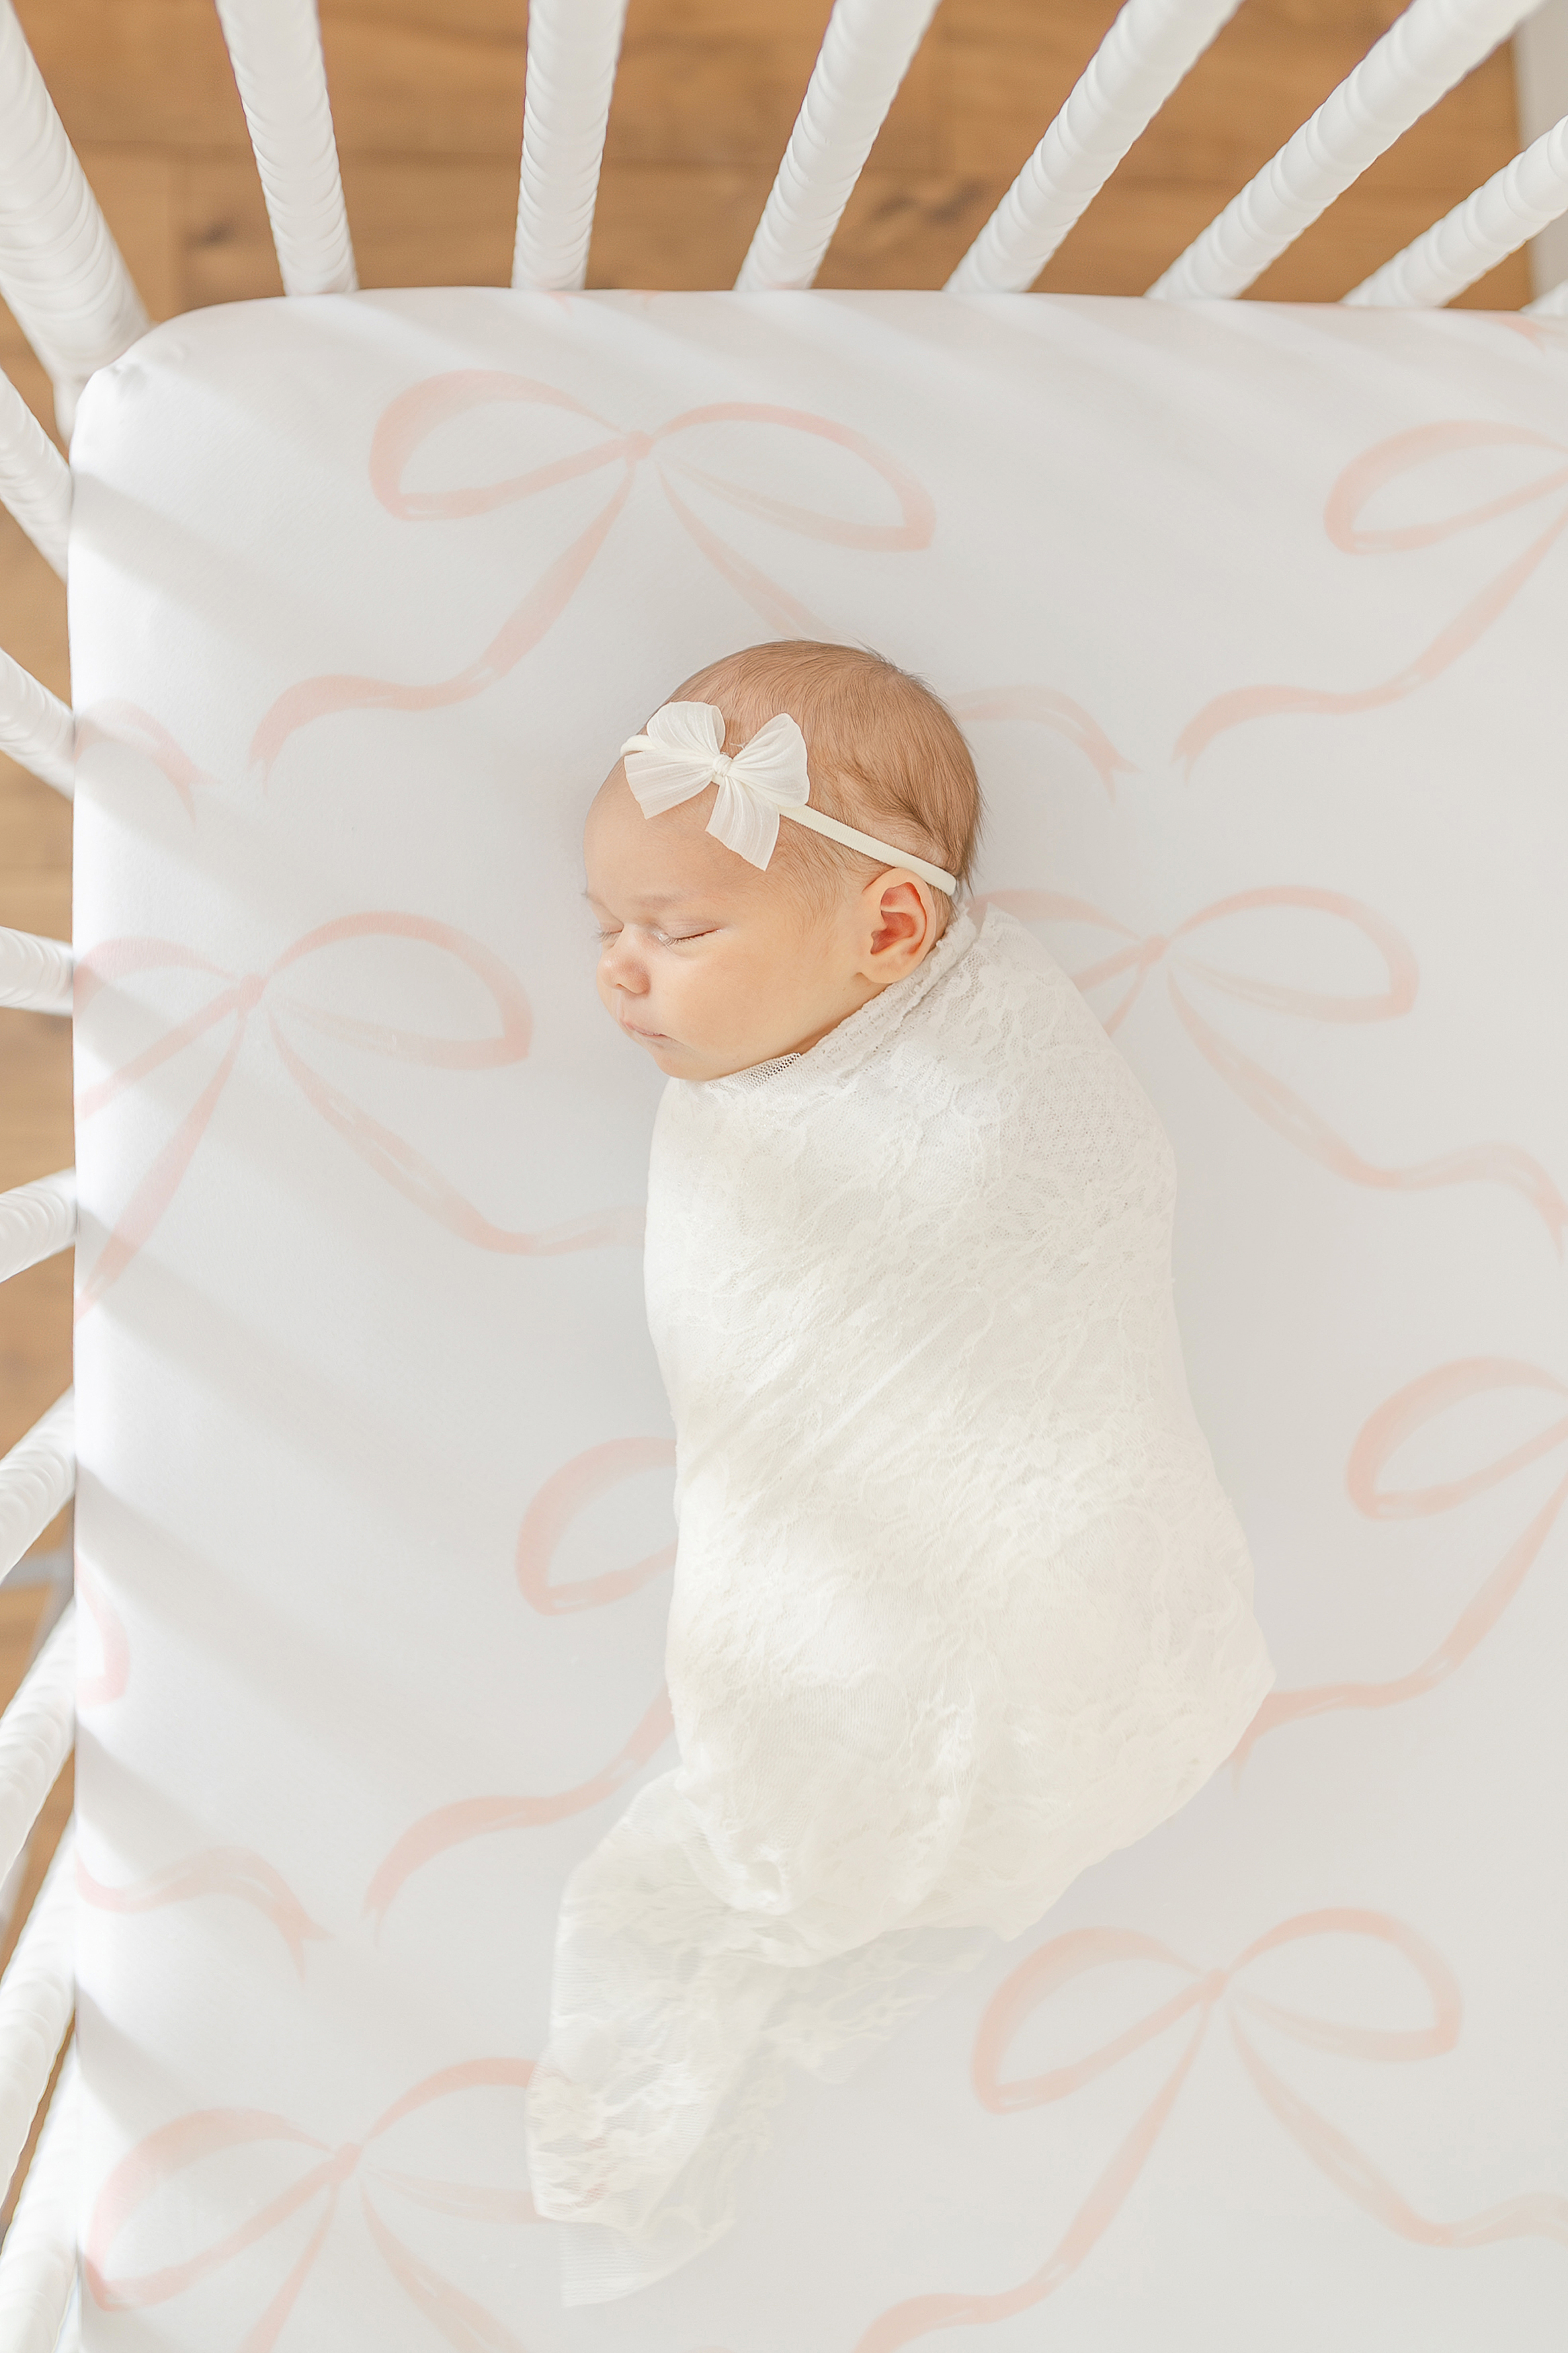 A newborn baby gilr wrapped in a white swaddle in her crib with white sheets with pink bows.